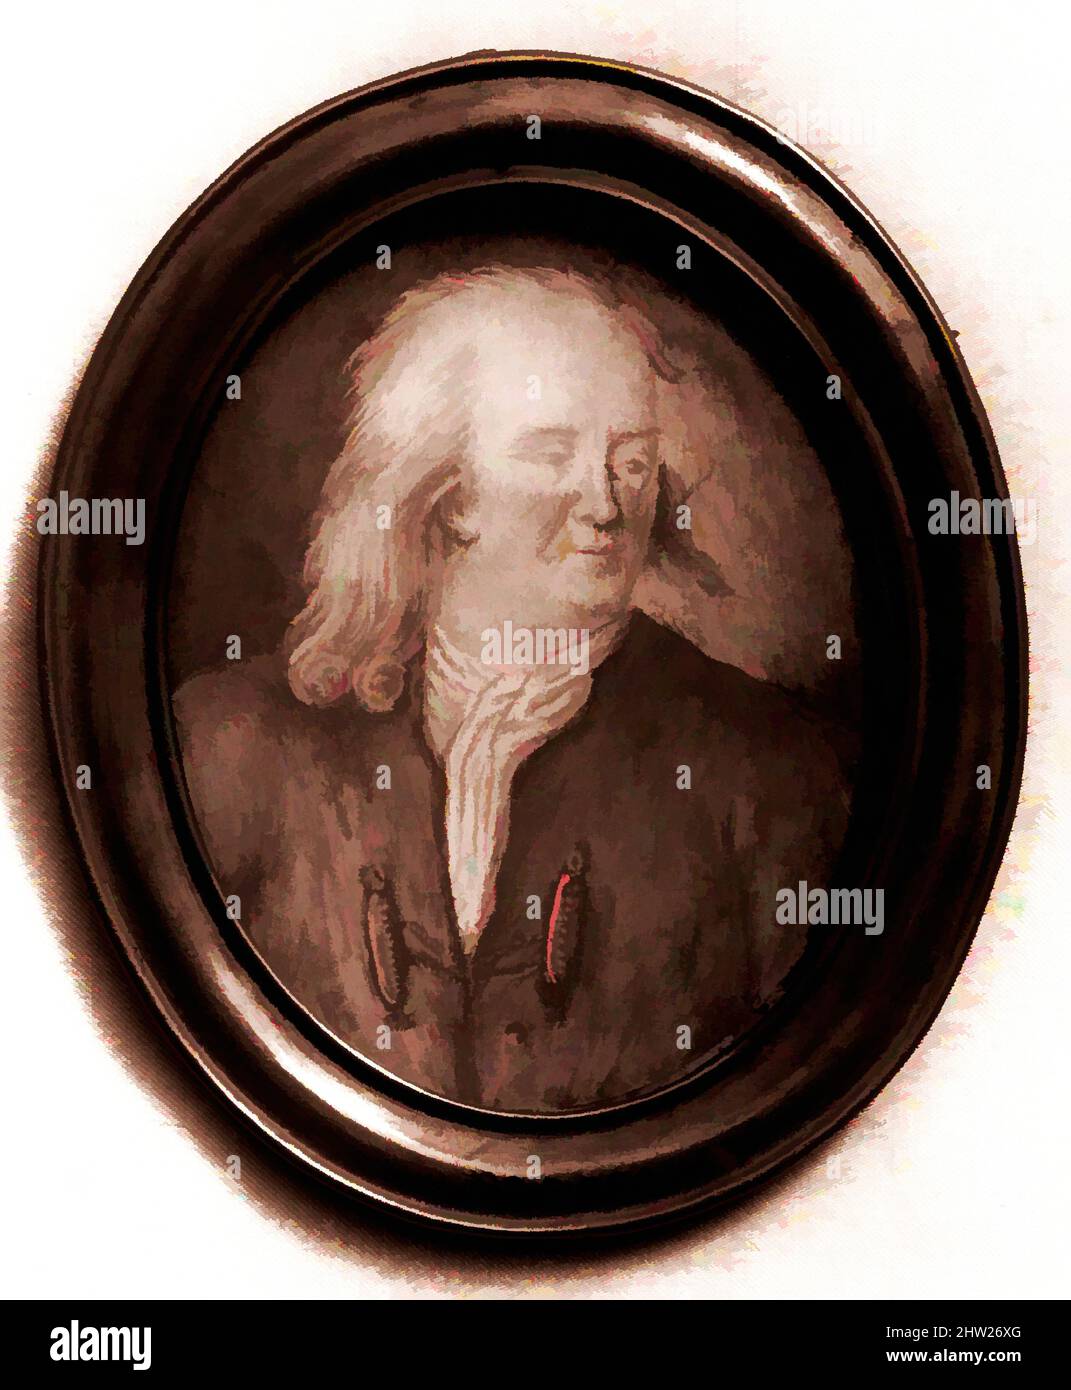 Art inspired by Plaque Portrait of Benjamin Franklin, 1776–1883, Made in France, Probably porcelain, 3 x 2 3/8 in. (7.6 x 6 cm), Paintings, Classic works modernized by Artotop with a splash of modernity. Shapes, color and value, eye-catching visual impact on art. Emotions through freedom of artworks in a contemporary way. A timeless message pursuing a wildly creative new direction. Artists turning to the digital medium and creating the Artotop NFT Stock Photo